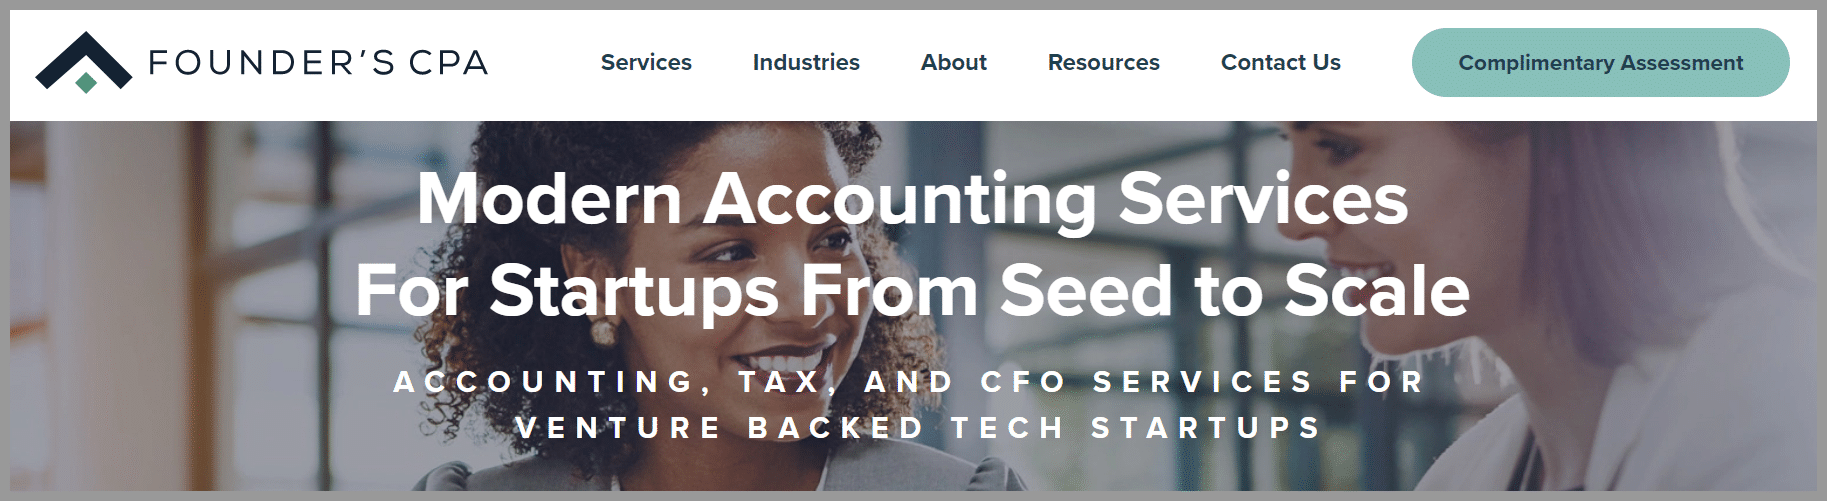 Founder's CPA Accounting Firm